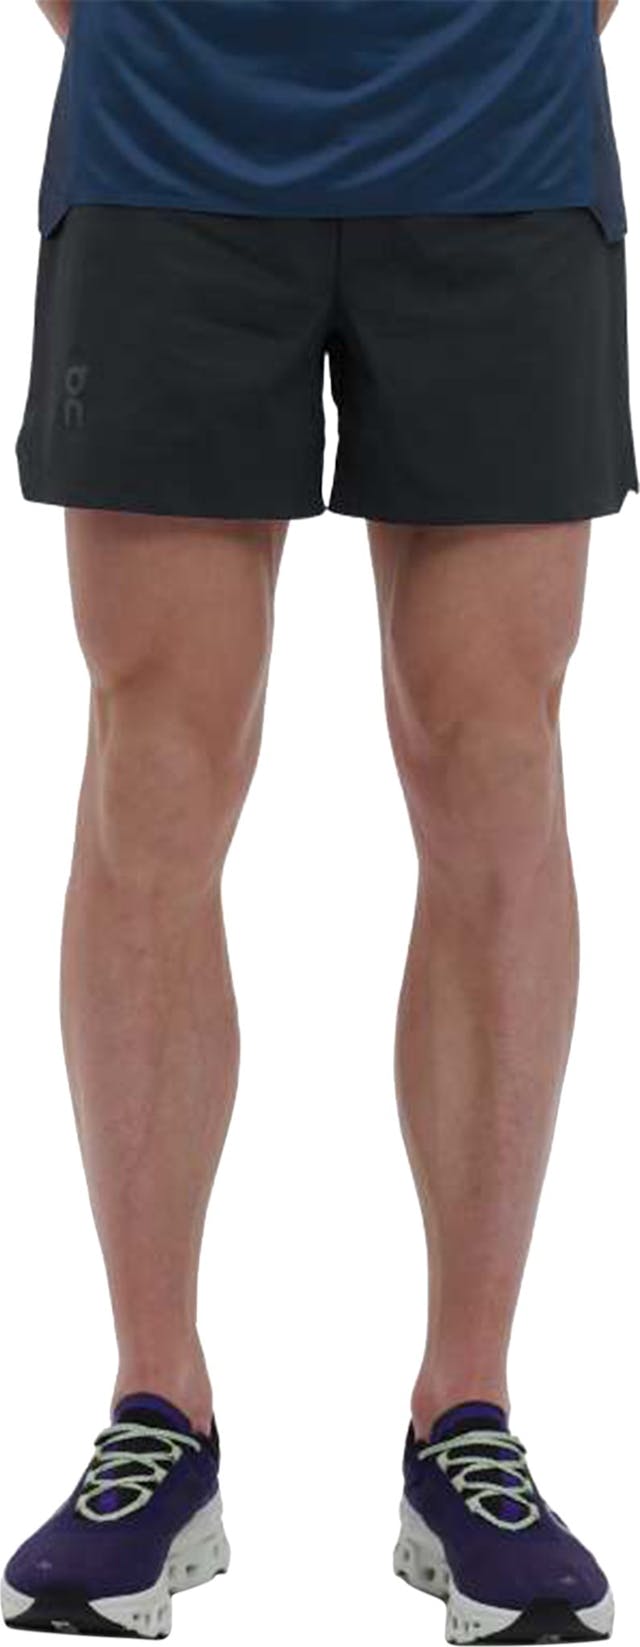 Product image for Lightweight 5 In Shorts - Men's